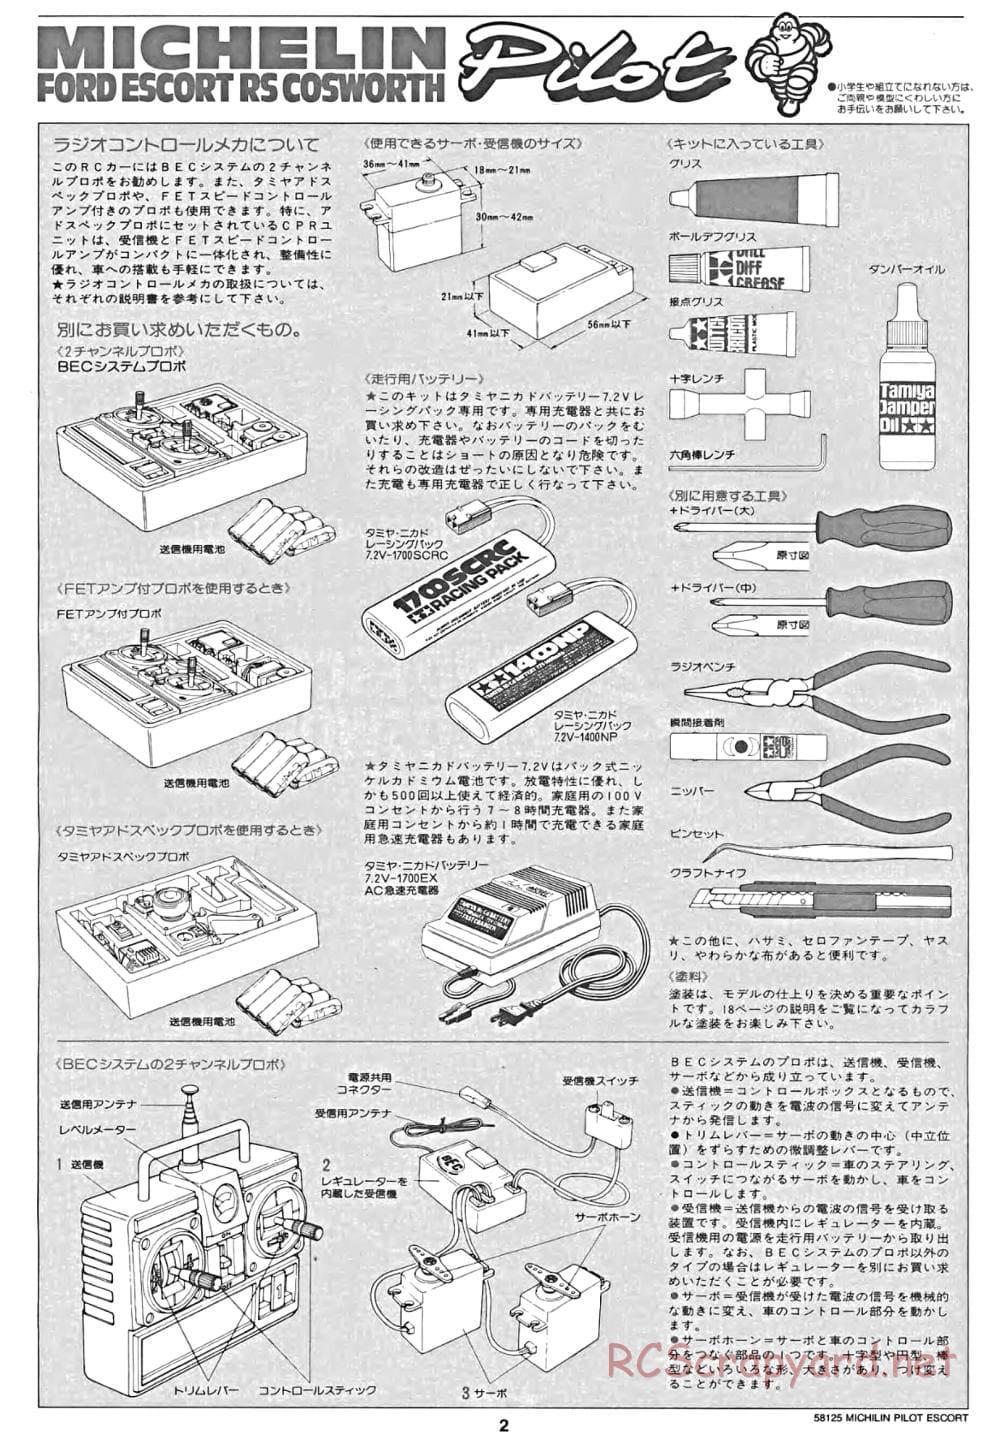 Tamiya - Michelin Pilot Ford Escort RS Cosworth - TA-01 Chassis - Manual - Page 2